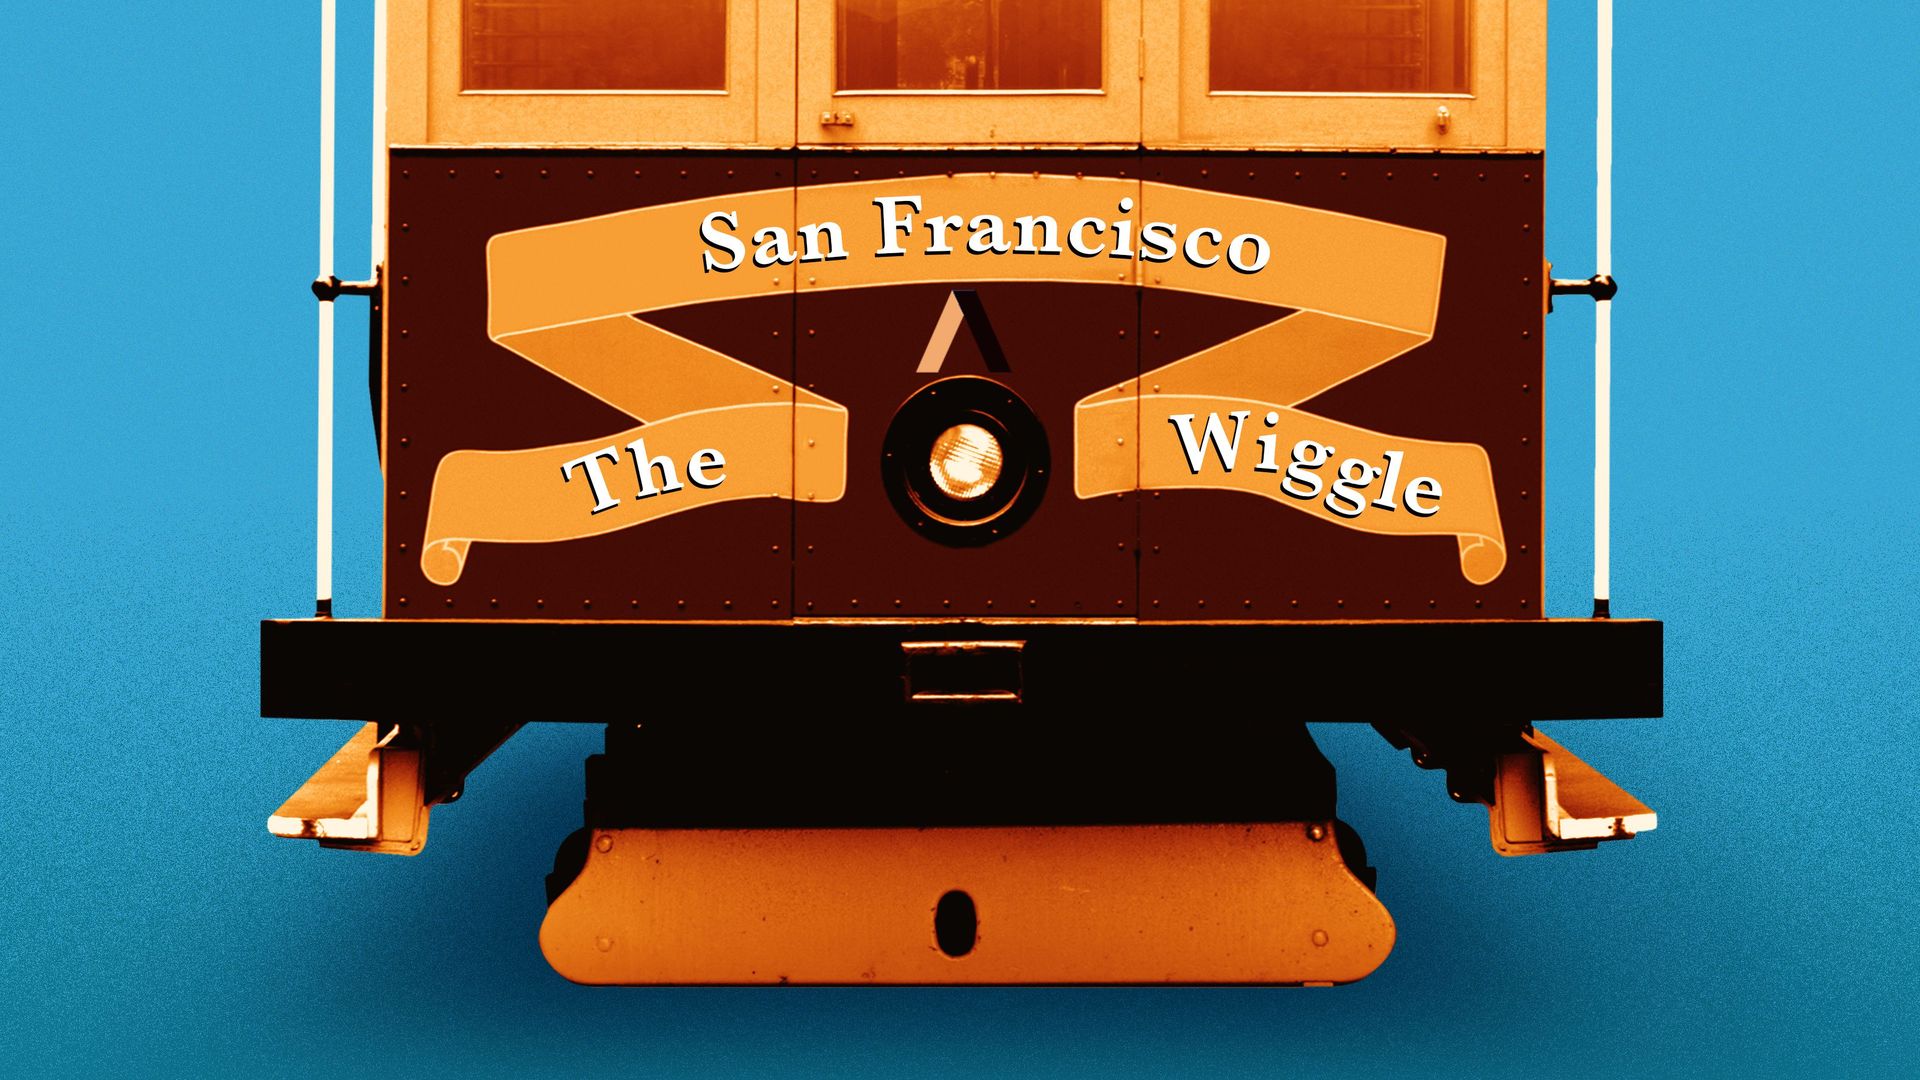 Illustration of a San Francisco cable car with "The Wiggle" written on the front.